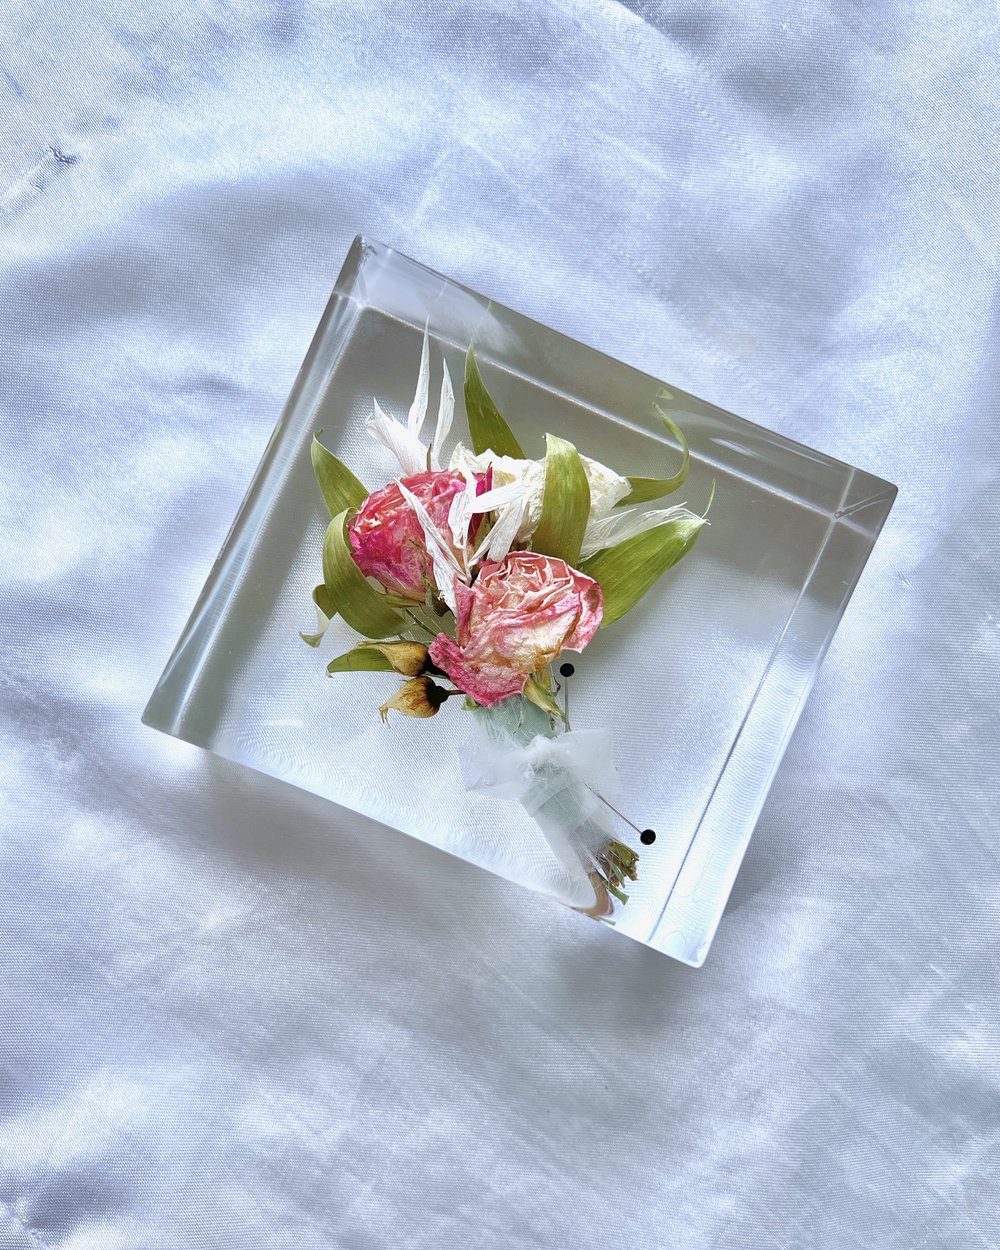 How To Preserve Flowers In Resin Like A Professional - Resin